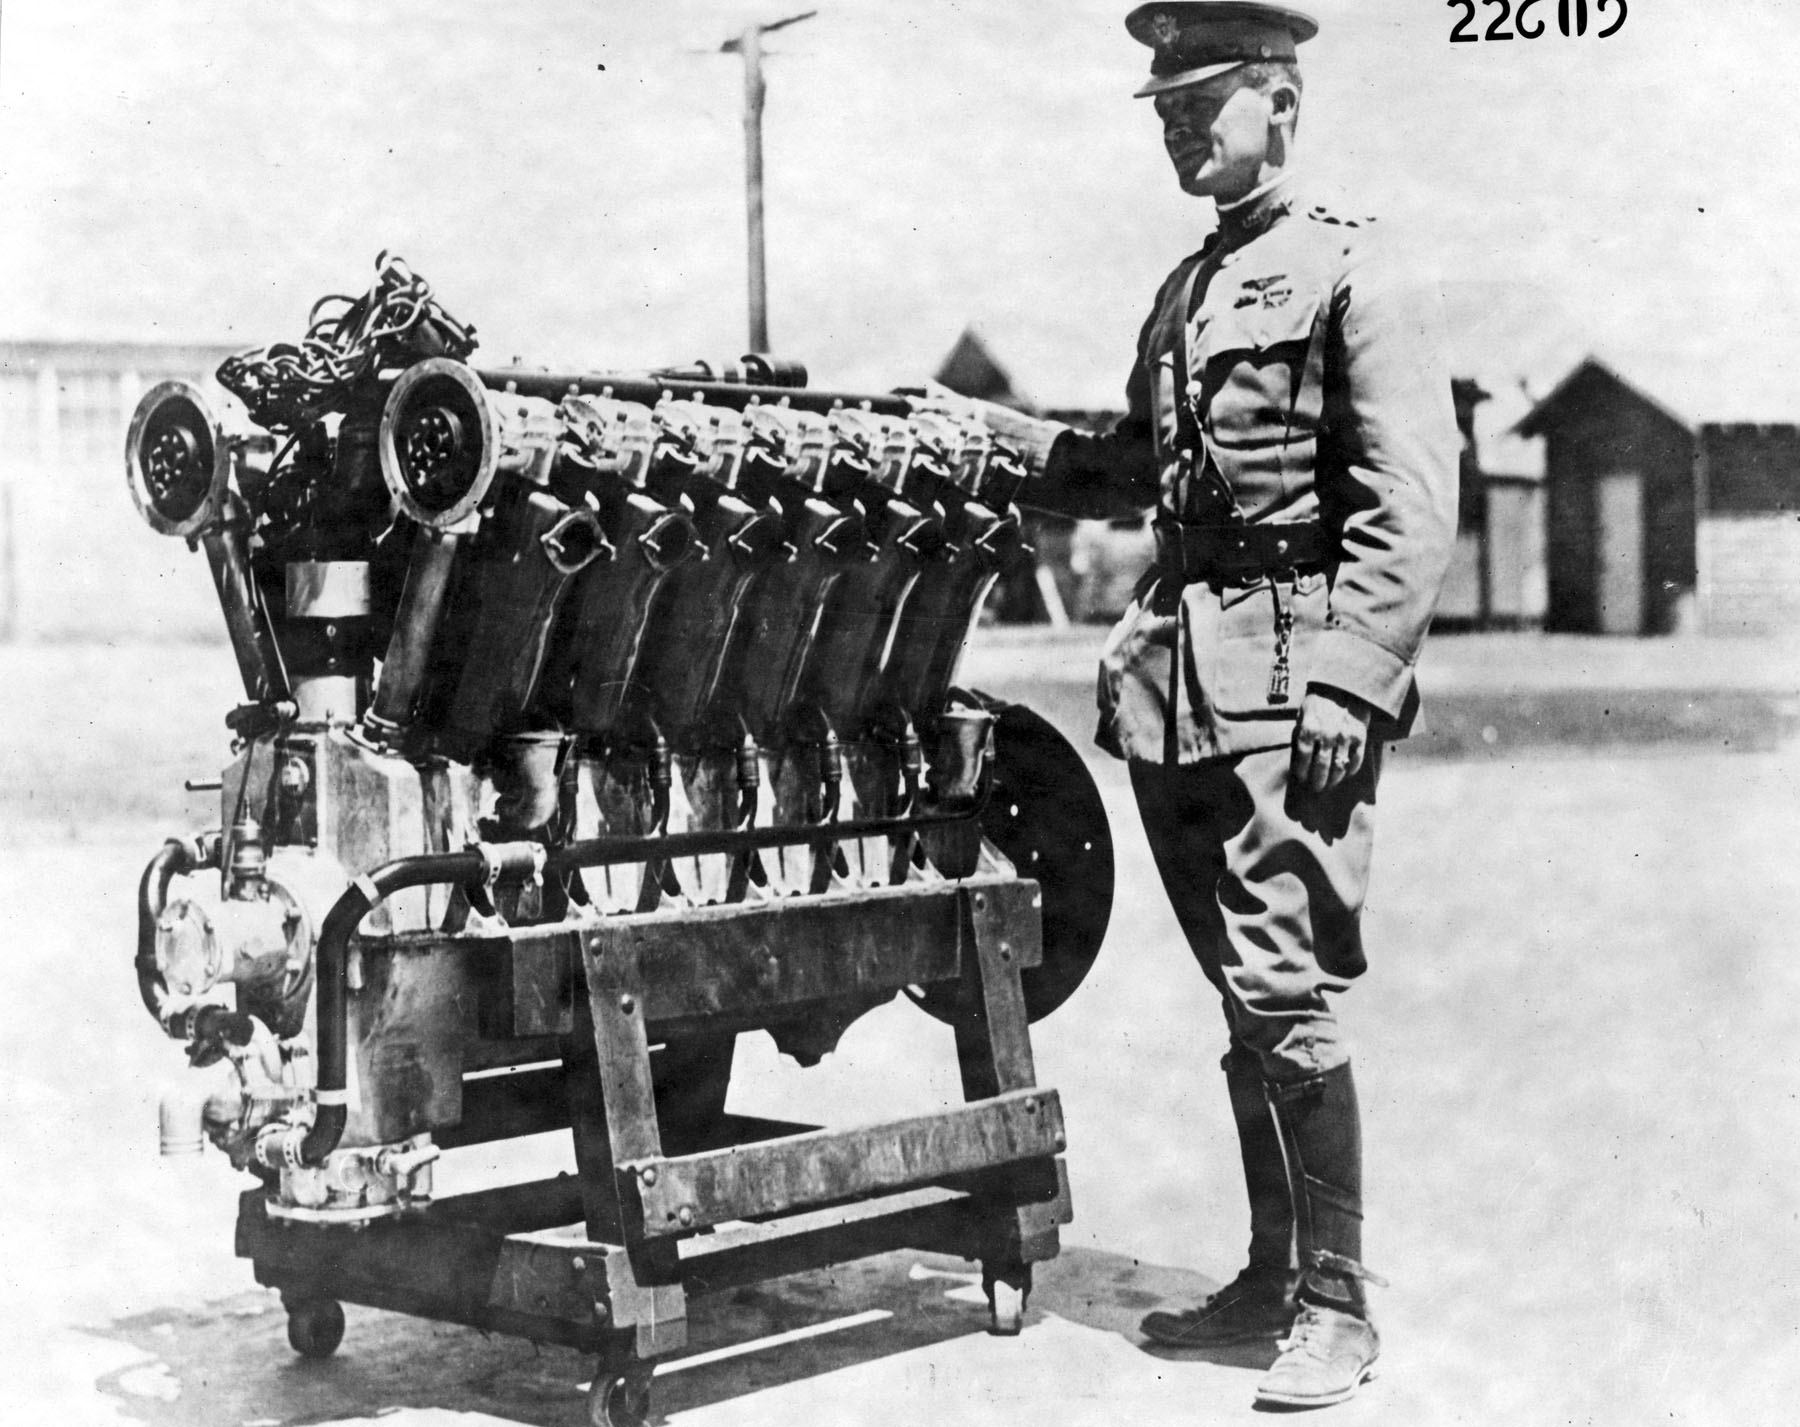 Major Henry H. Arnold standing beside the first Liberty 12 aircraft engine turned out for war use. "Hap" Arnold would later hold the 5-star rank of General of the Army and General of the Air Force. (U.S. Air Force)